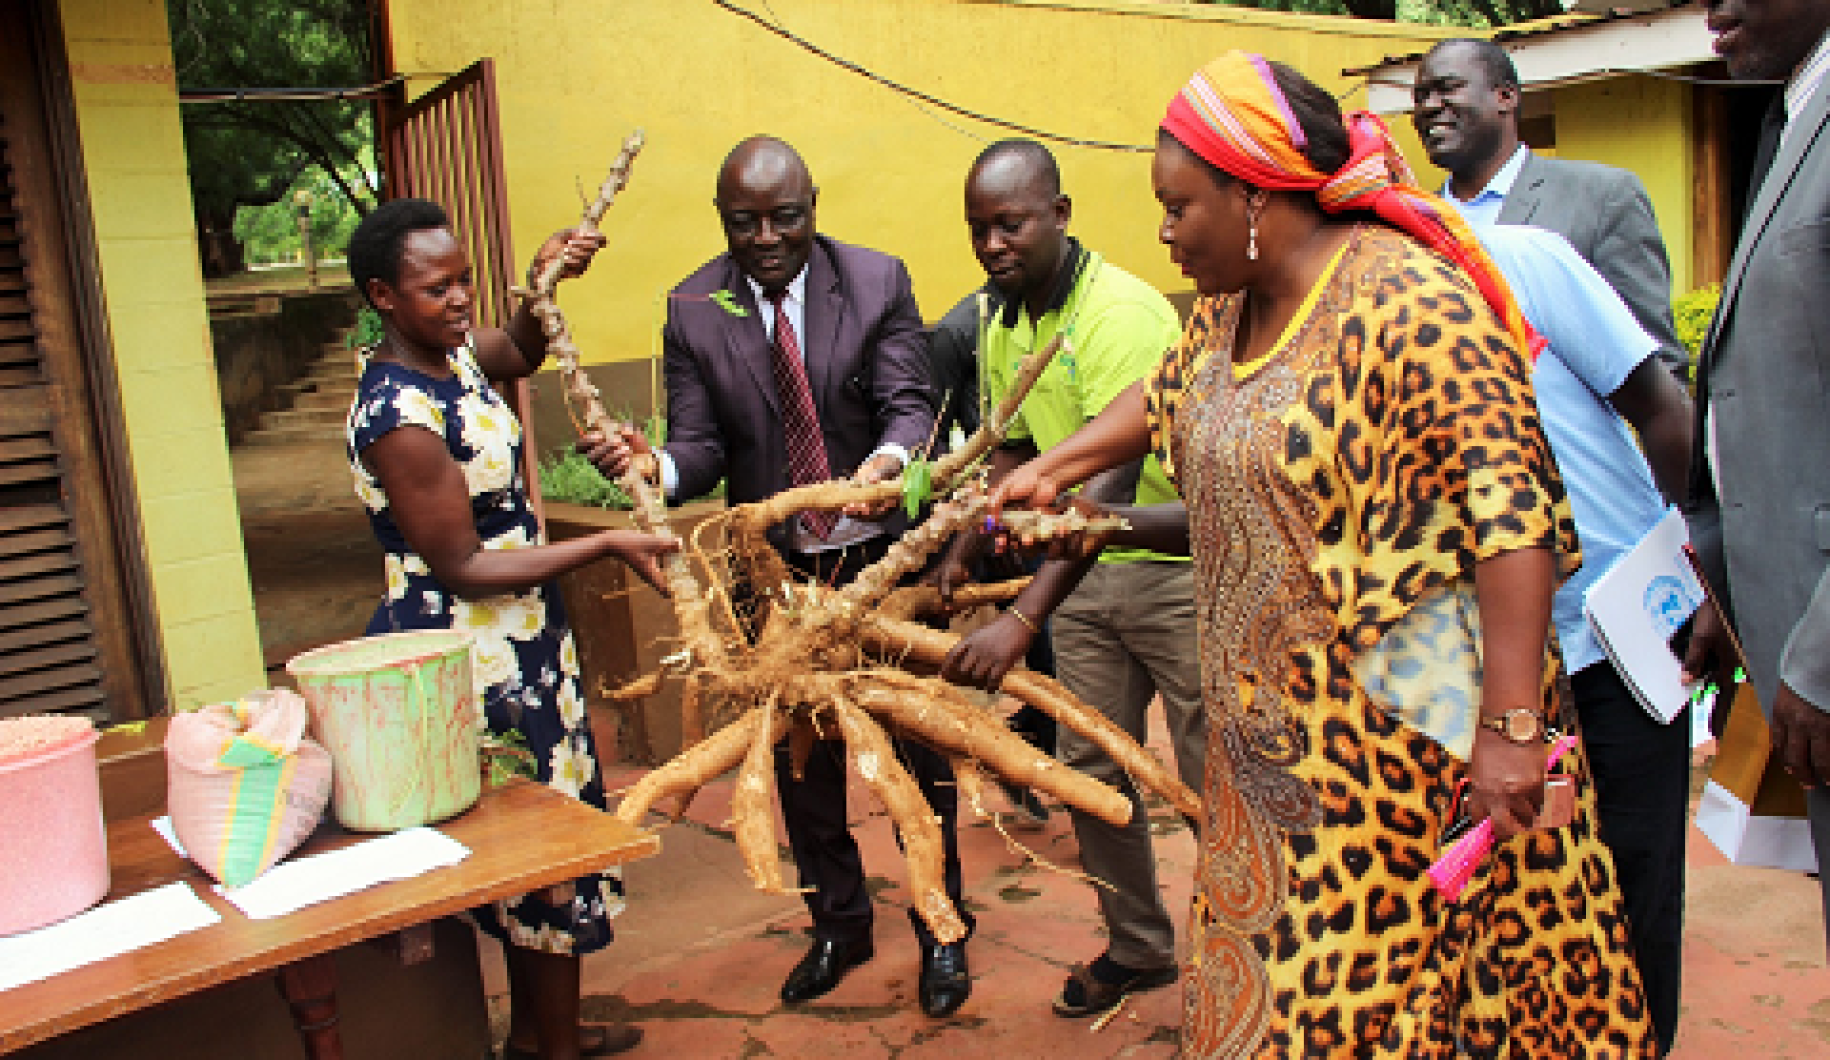 Women and men hold up a large cassava plant